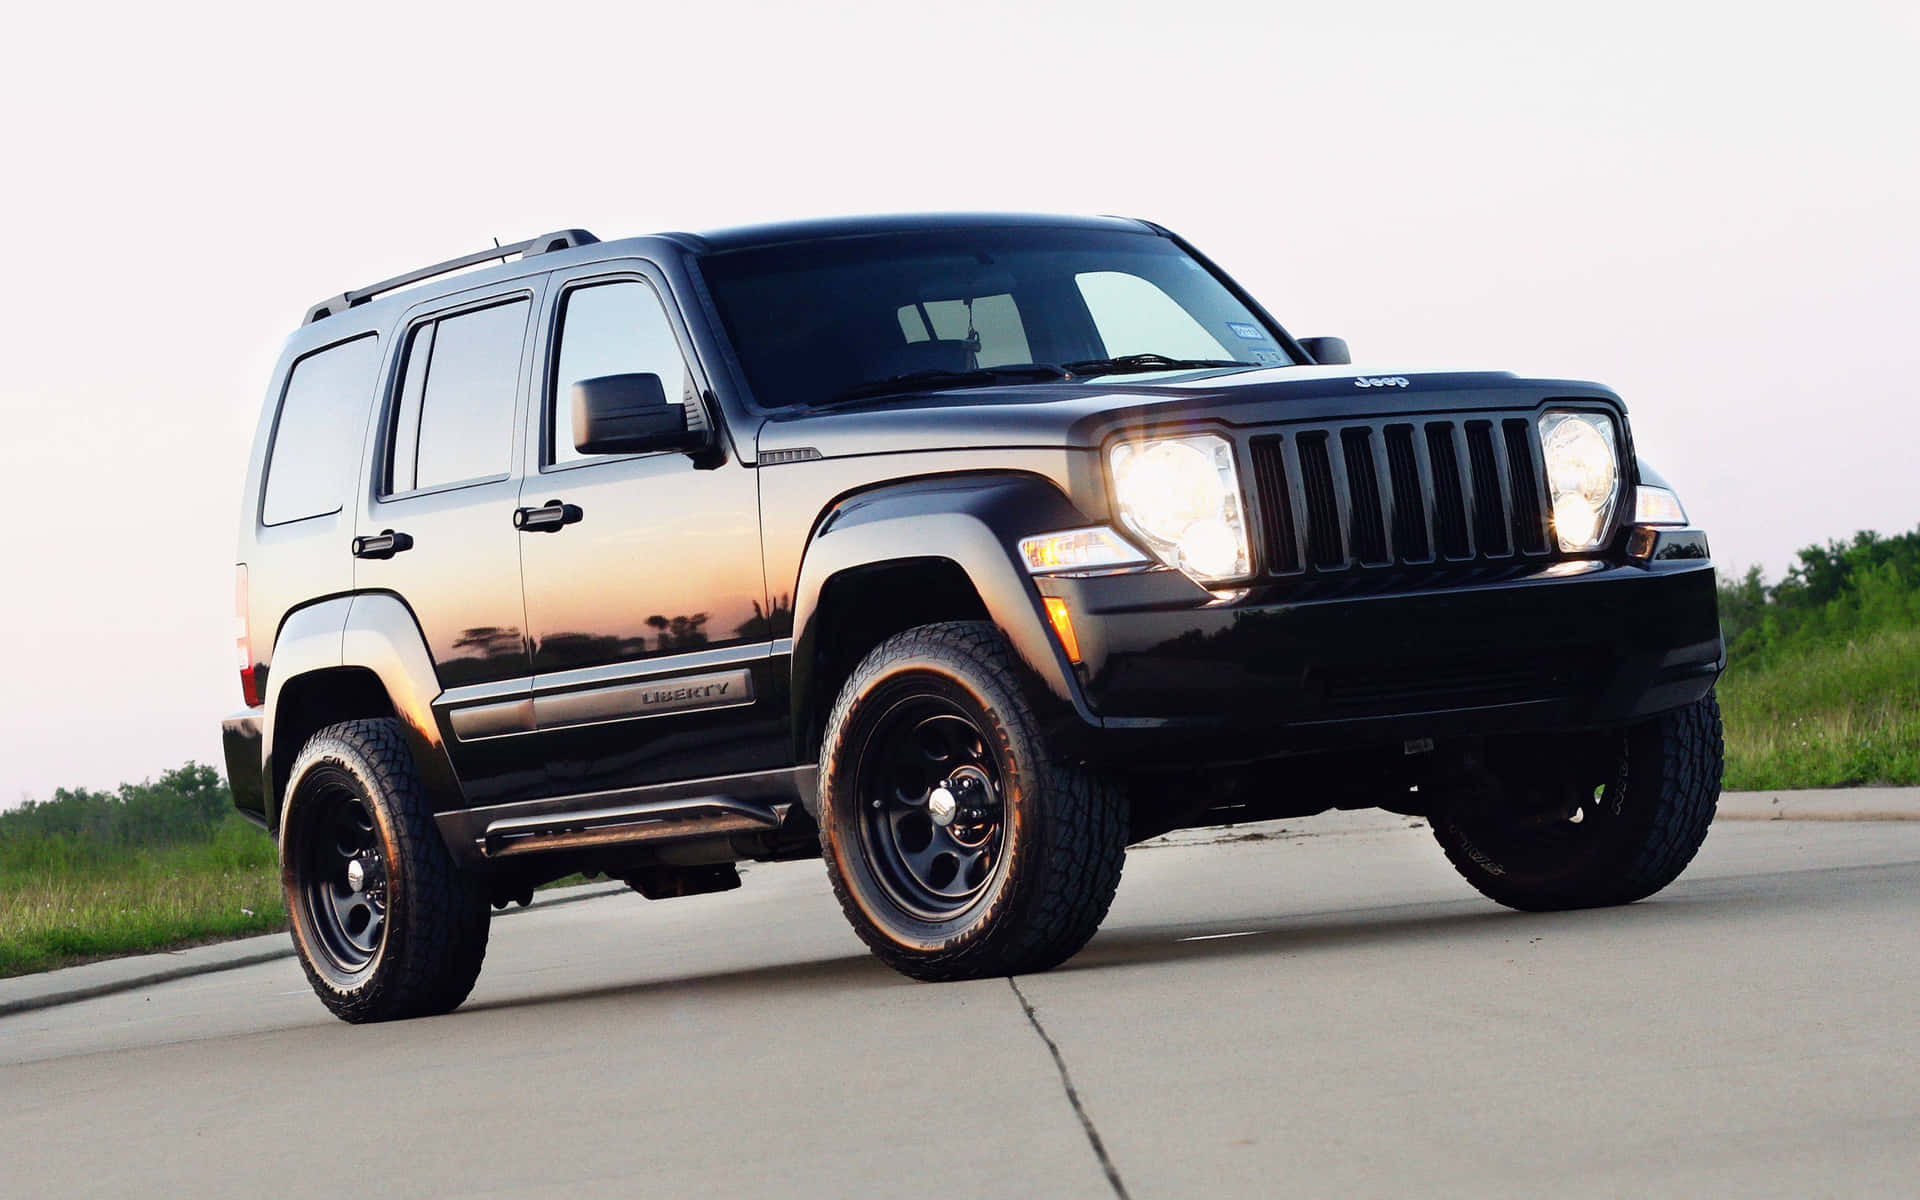 Jeep Liberty - A Powerful Off-Road Adventure Wallpaper